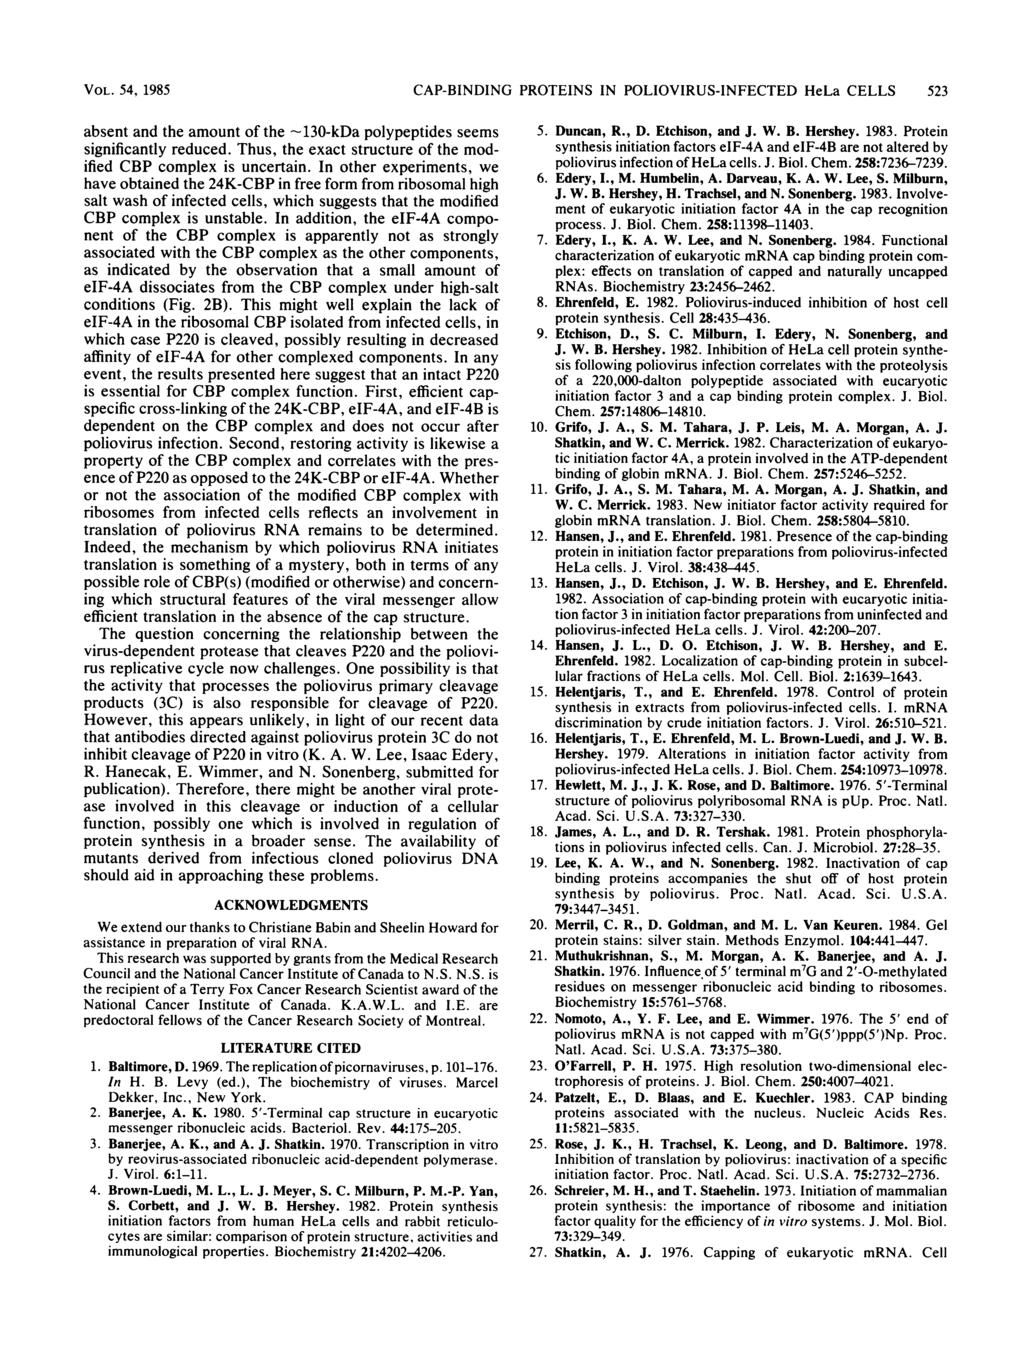 VOL. 54, 1985 CAP-BINDING PROTEINS IN POLIOVIRUS-INFECTED HeLa CELLS 523 absent and the amount of the -130-kDa polypeptides seems significantly reduced.